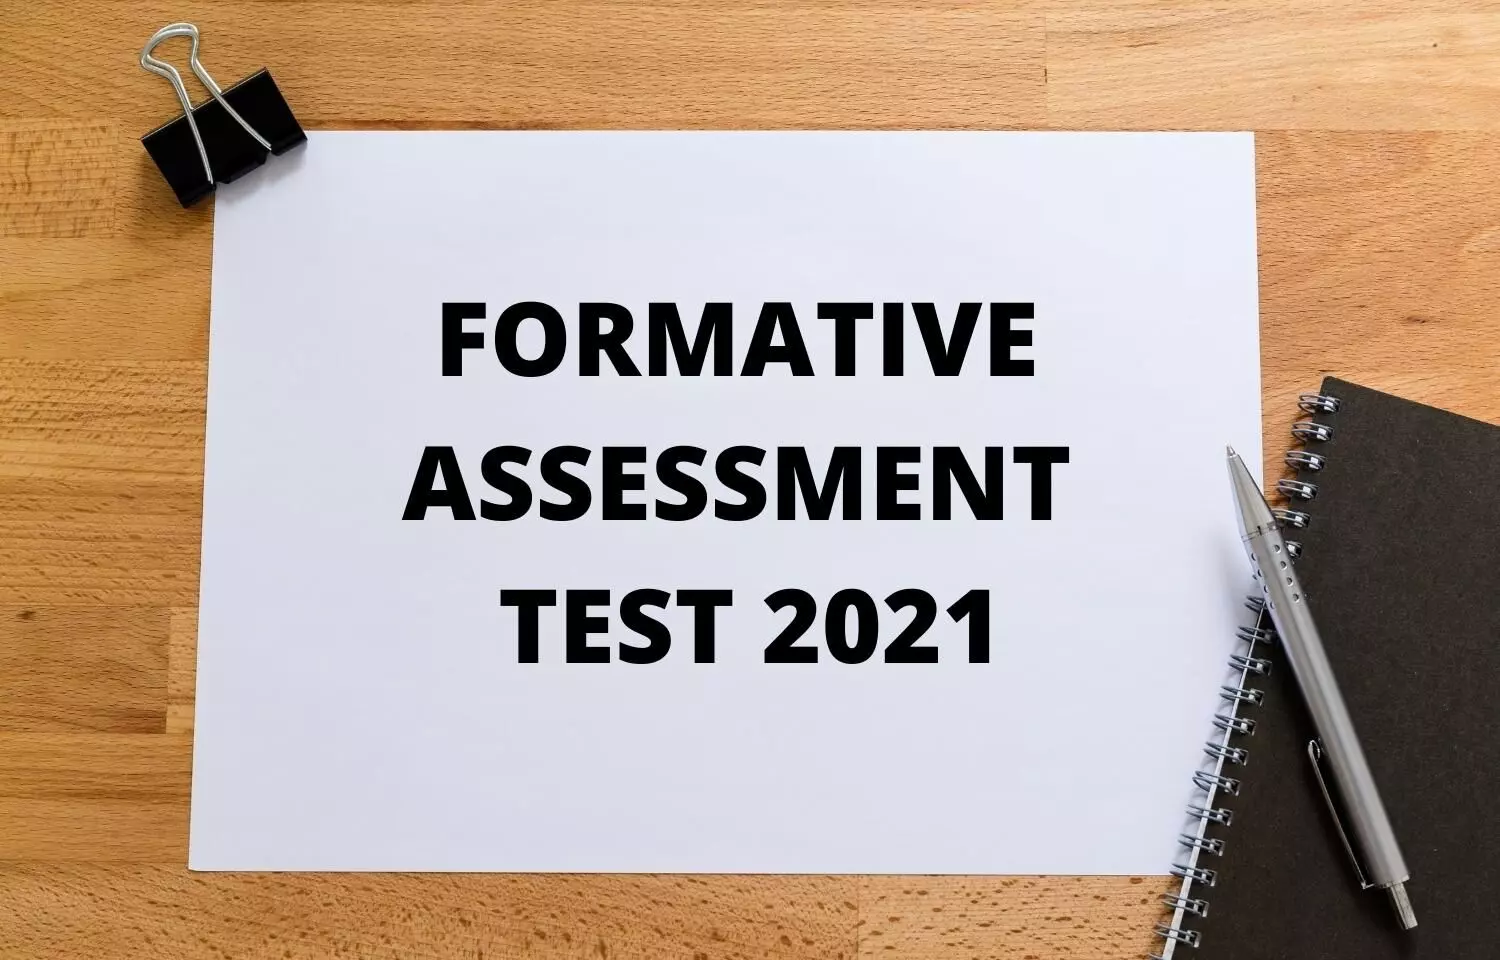 NBE begins registration for Formative Assessment Test 2021, Check out eligibility criteria for DNB, DrNB, FNB Trainees, exam scheme, fee, application details here